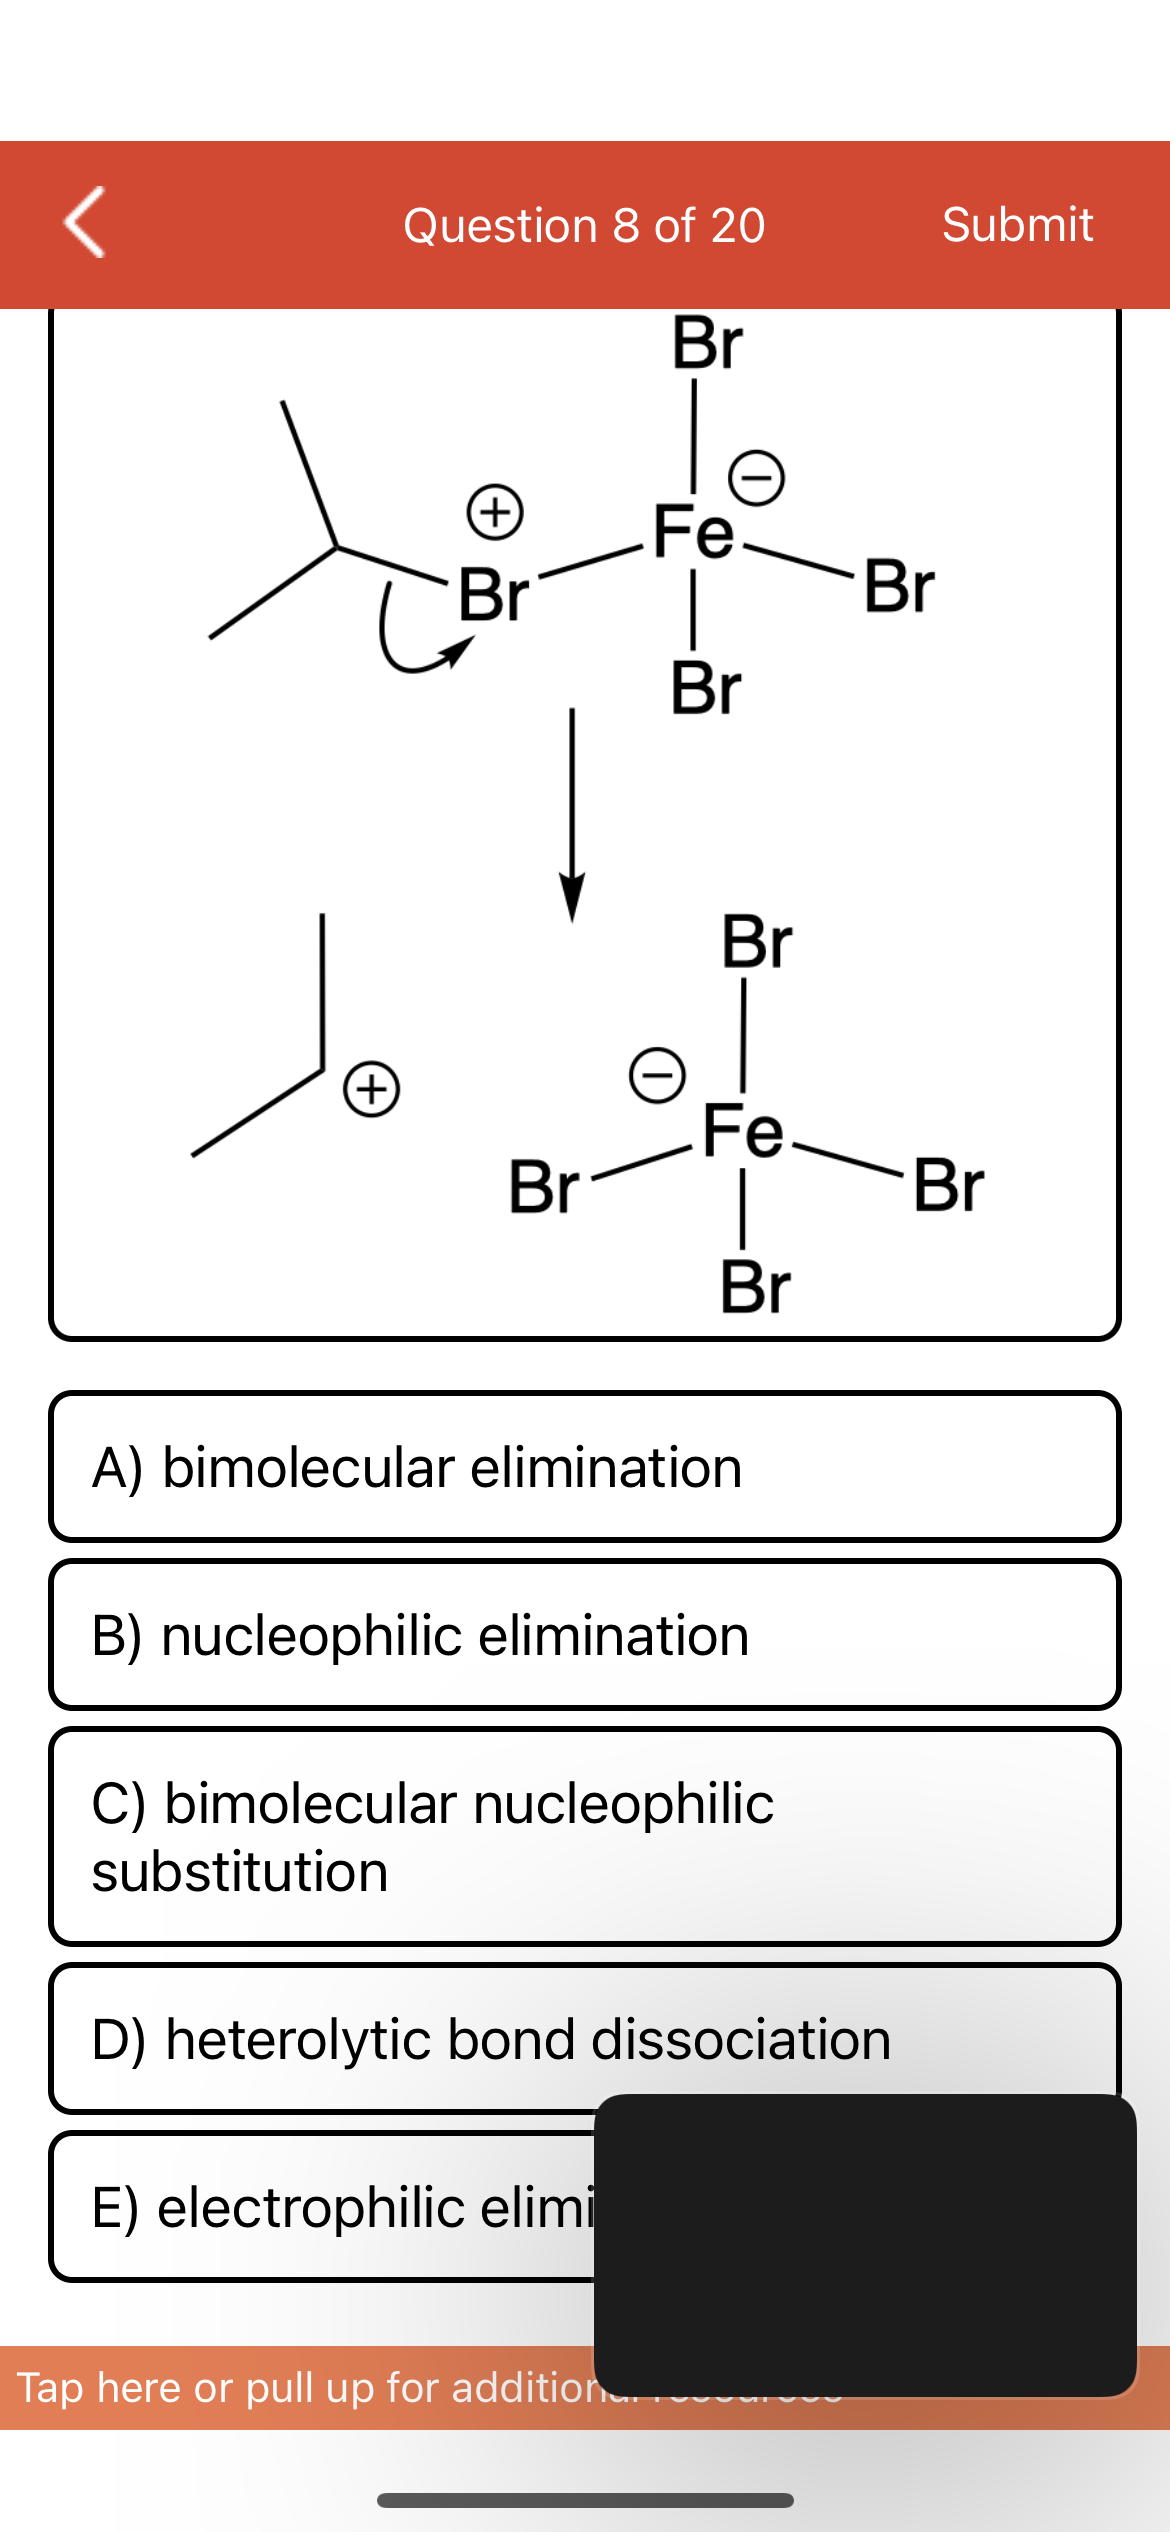 Question 8 of 20
Submit
Br
Fe
Br
(+)
Br
Br
Br
(+)
Fe-
Br
Br
Br
A) bimolecular elimination
B) nucleophilic elimination
C) bimolecular nucleophilic
substitution
D) heterolytic bond dissociation
E) electrophilic elimi
Tap here or pull up for addition
